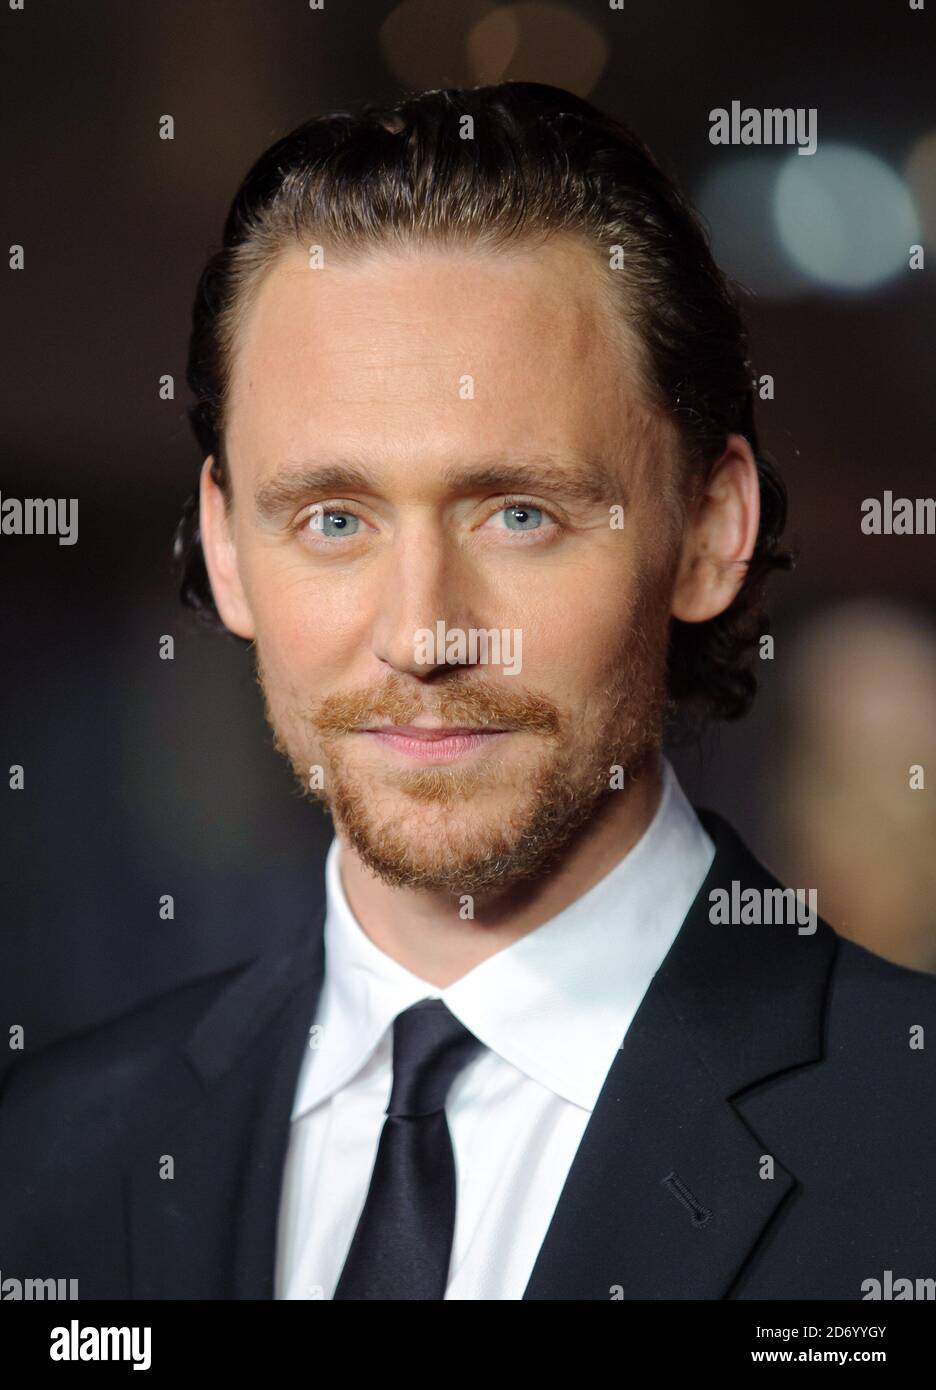 Tom Hiddleston arrives at the premiere of Deep Blue Sea, held at the Odeon cinema in Leicester Square, as the closing night gala of the BFI London Film Festival. Stock Photo